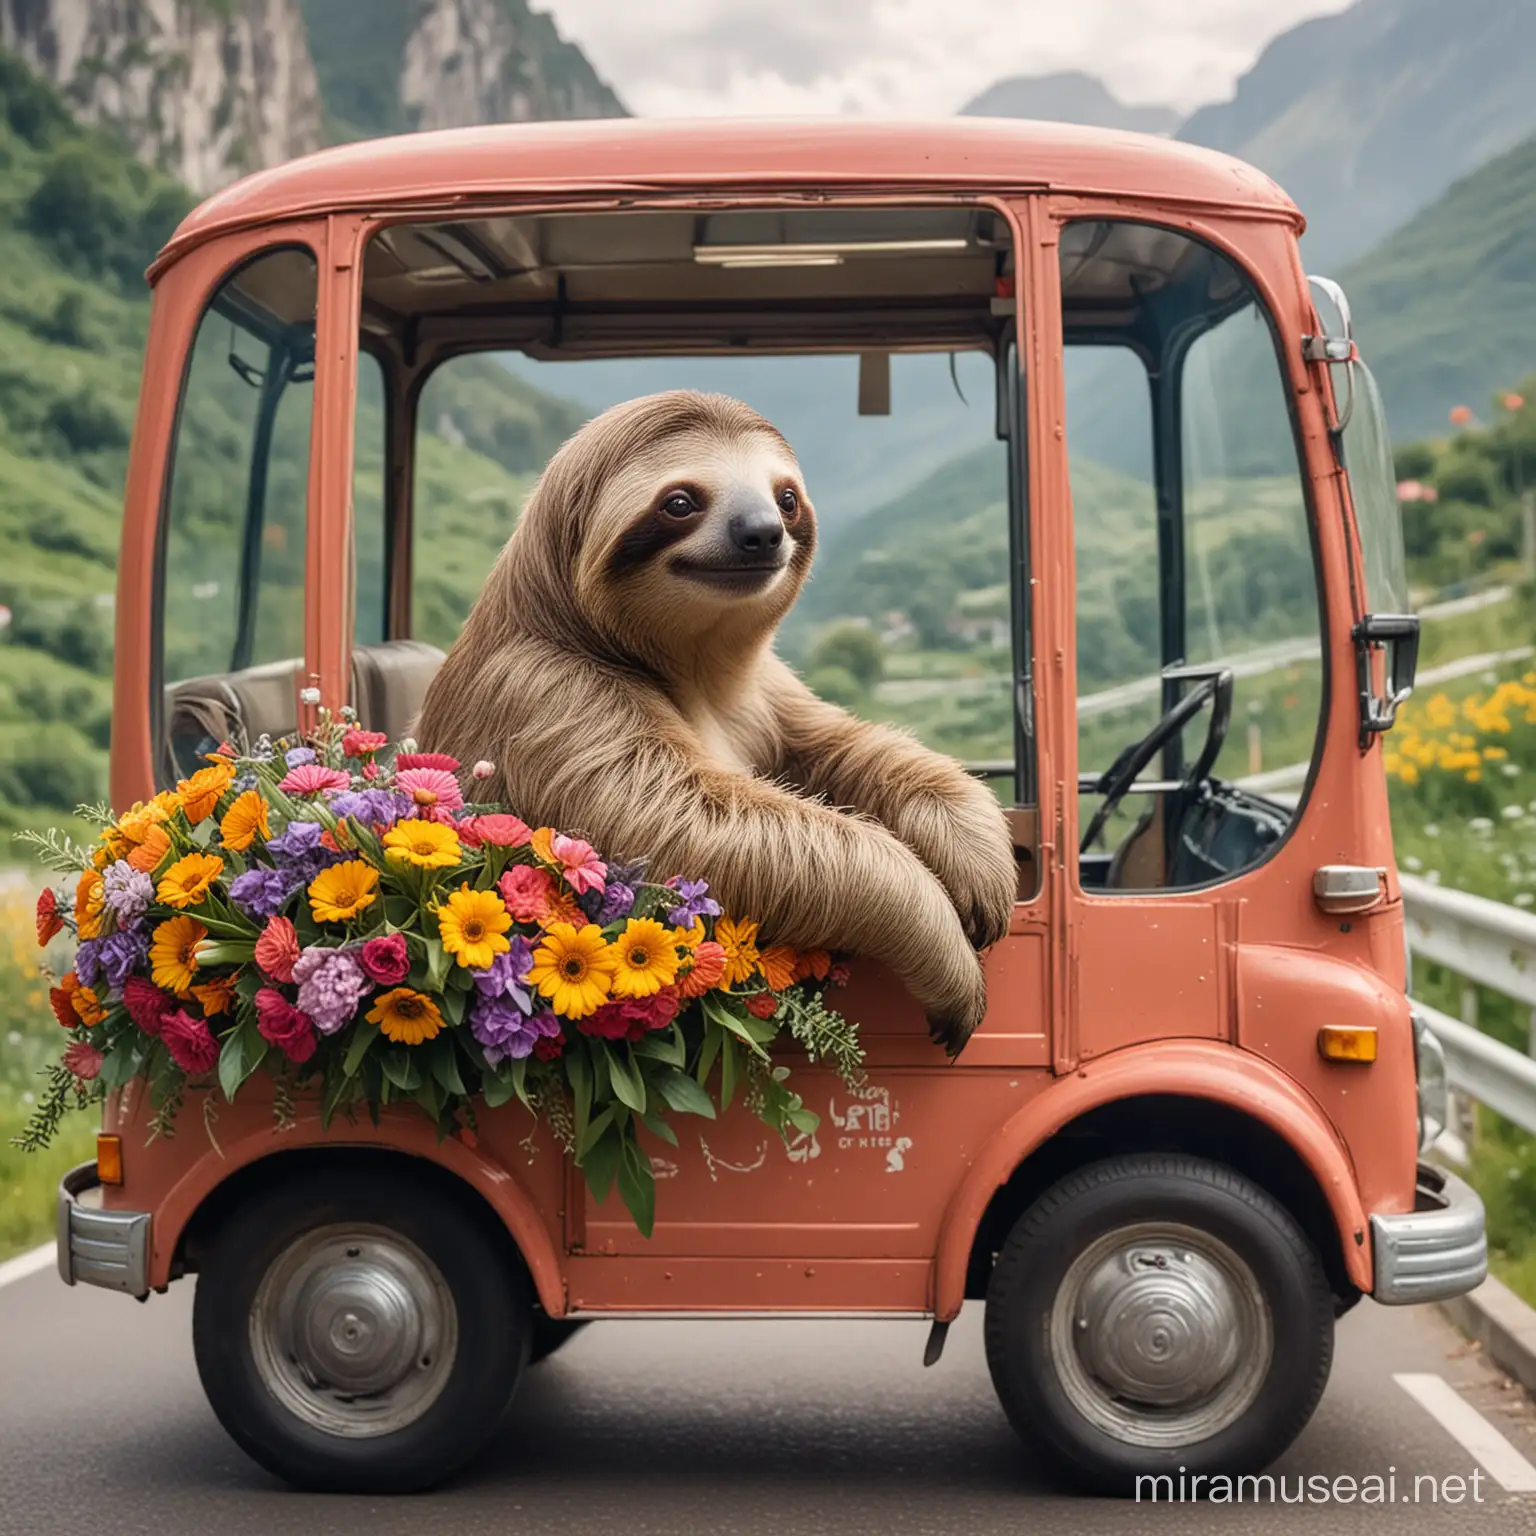 Relaxed Sloth Driving Colorful FlowerAdorned Bus Through Picturesque Landscape